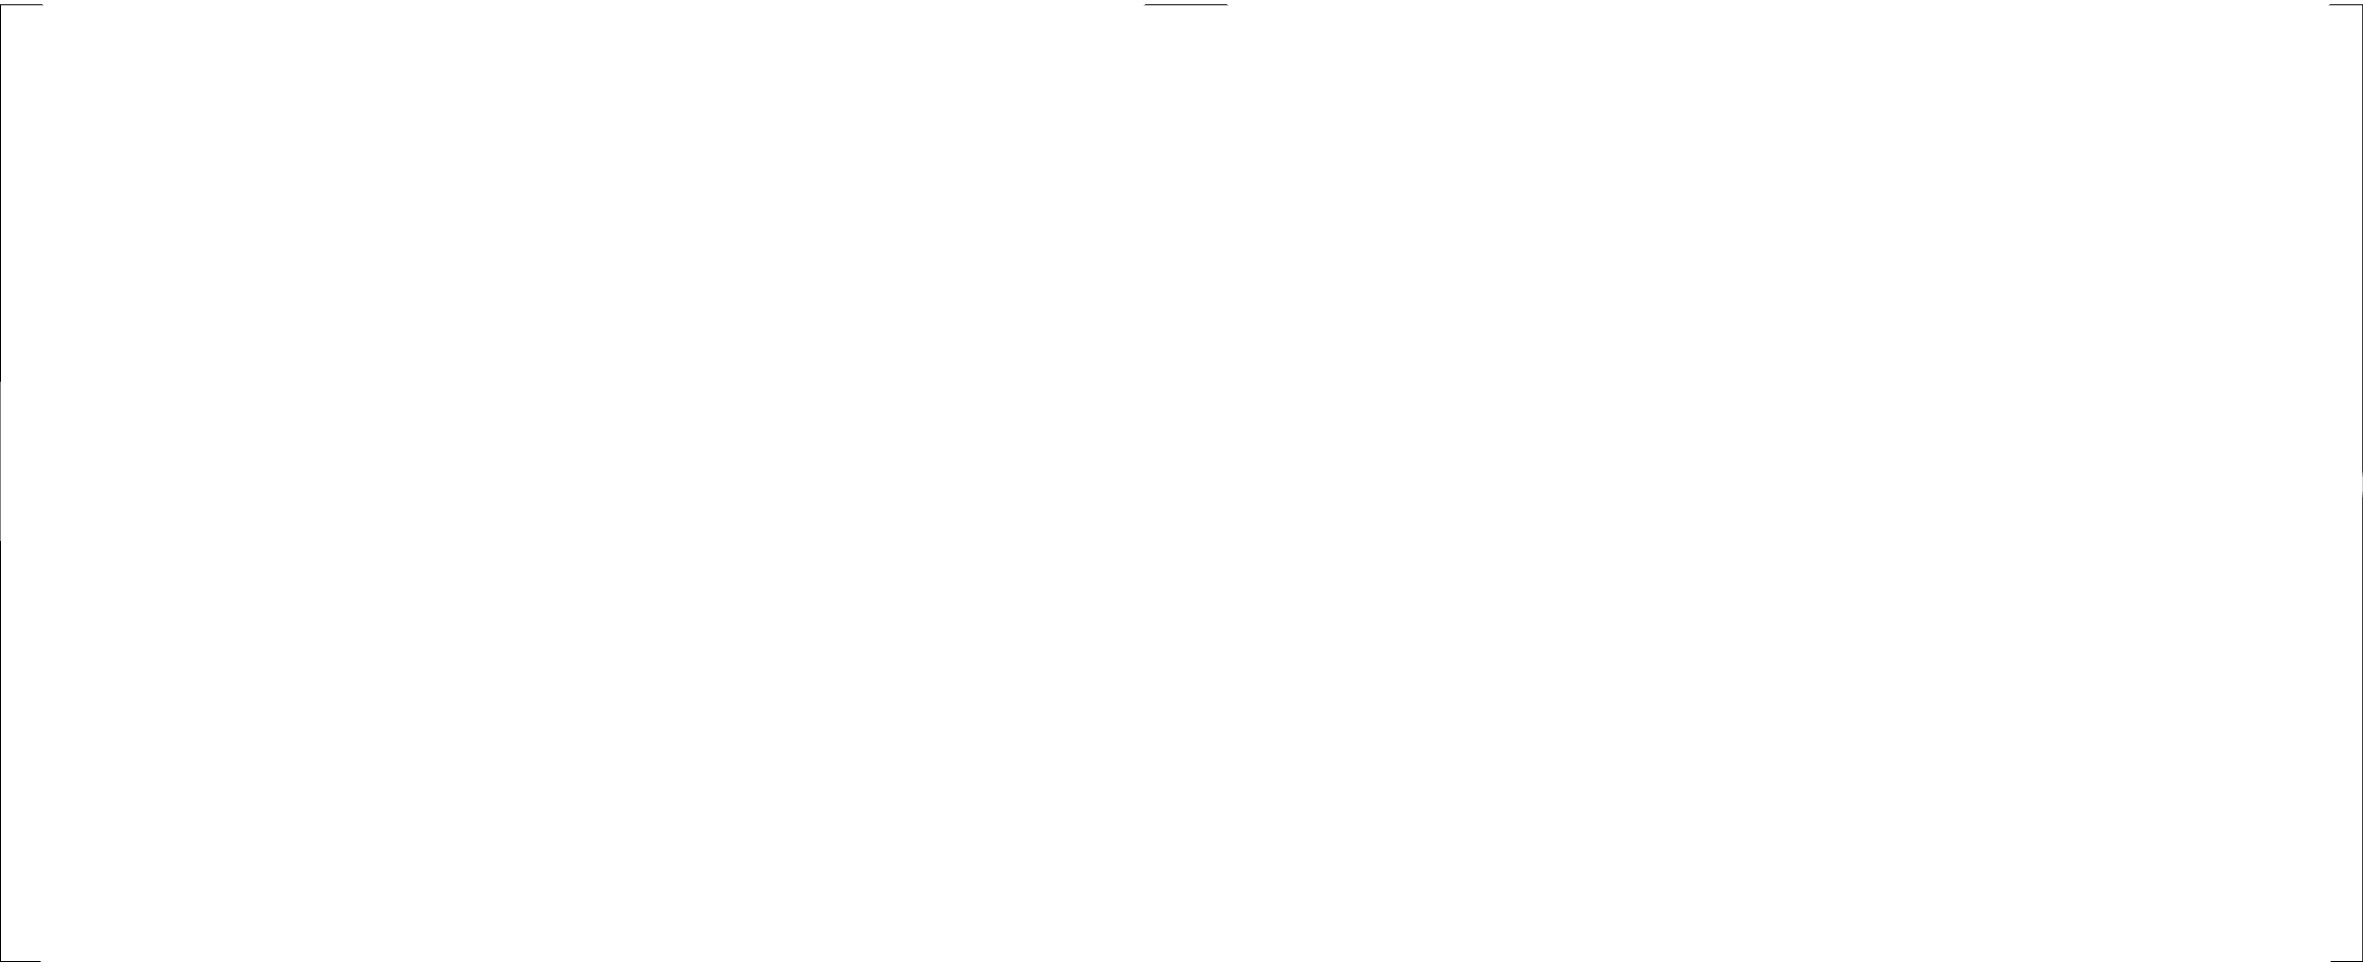 Lewis Logo - Lewis Coaches Years of Passenger Service